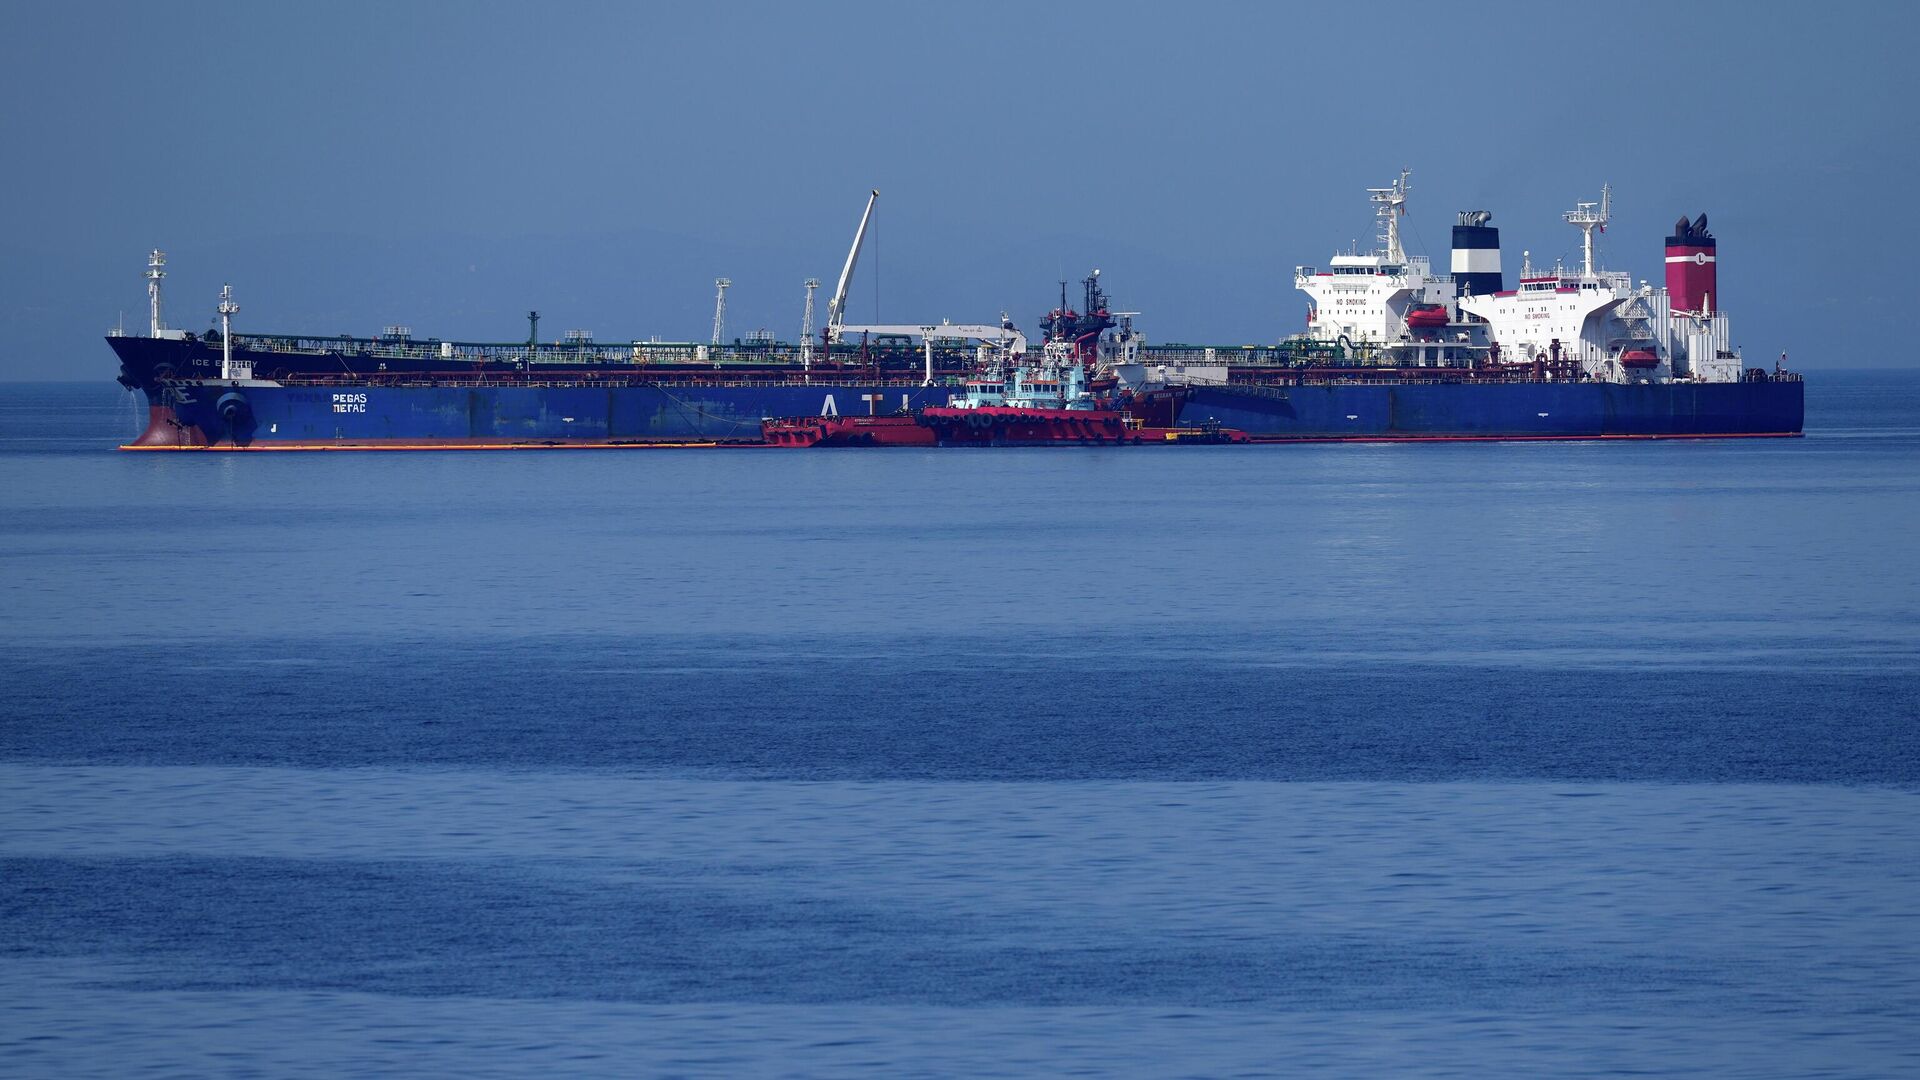 The Pegas tanker, that has recently changed its name to Lana, is seen off the port of Karystos on the Aegean Sea island of Evia, Greece, Friday, May 27, 2022. The crude oil cargo of the Iranian-flagged tanker that was stopped in Greek waters last month has been seized and is being transferred to another vessel following a request from the U.S., a Greek official said Thursday. (AP Photo/Thanassis Stavrakis) - Sputnik International, 1920, 07.09.2023